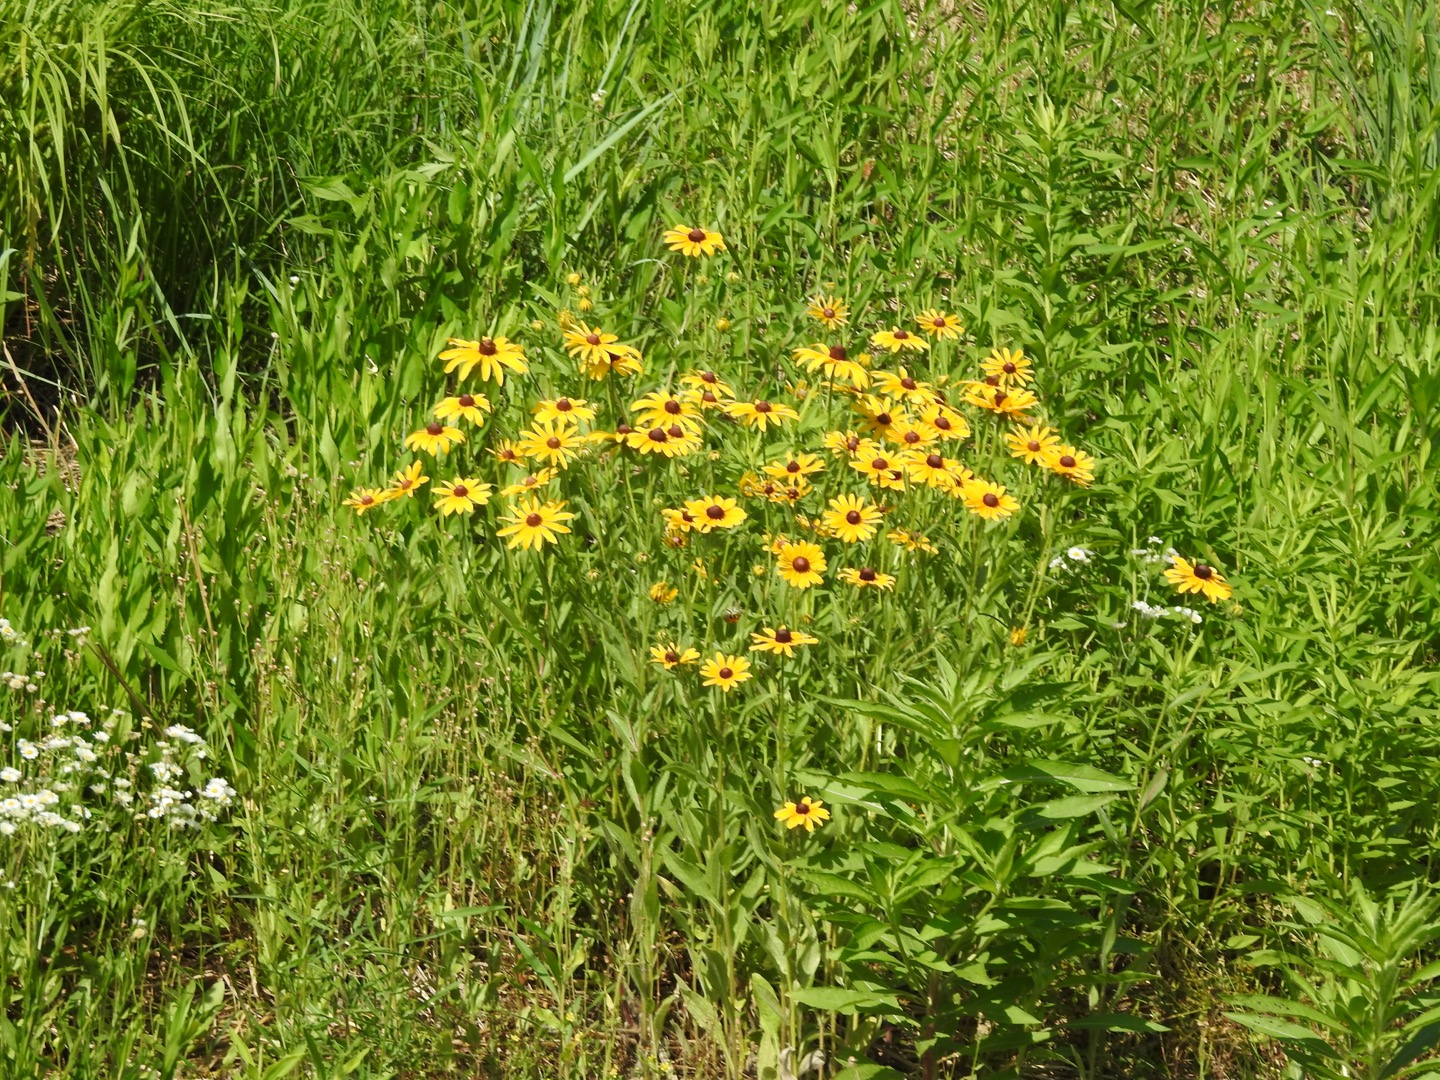 A clump of bright yellow flowers with black centers. Tall grasses surround the flowers on all sides.